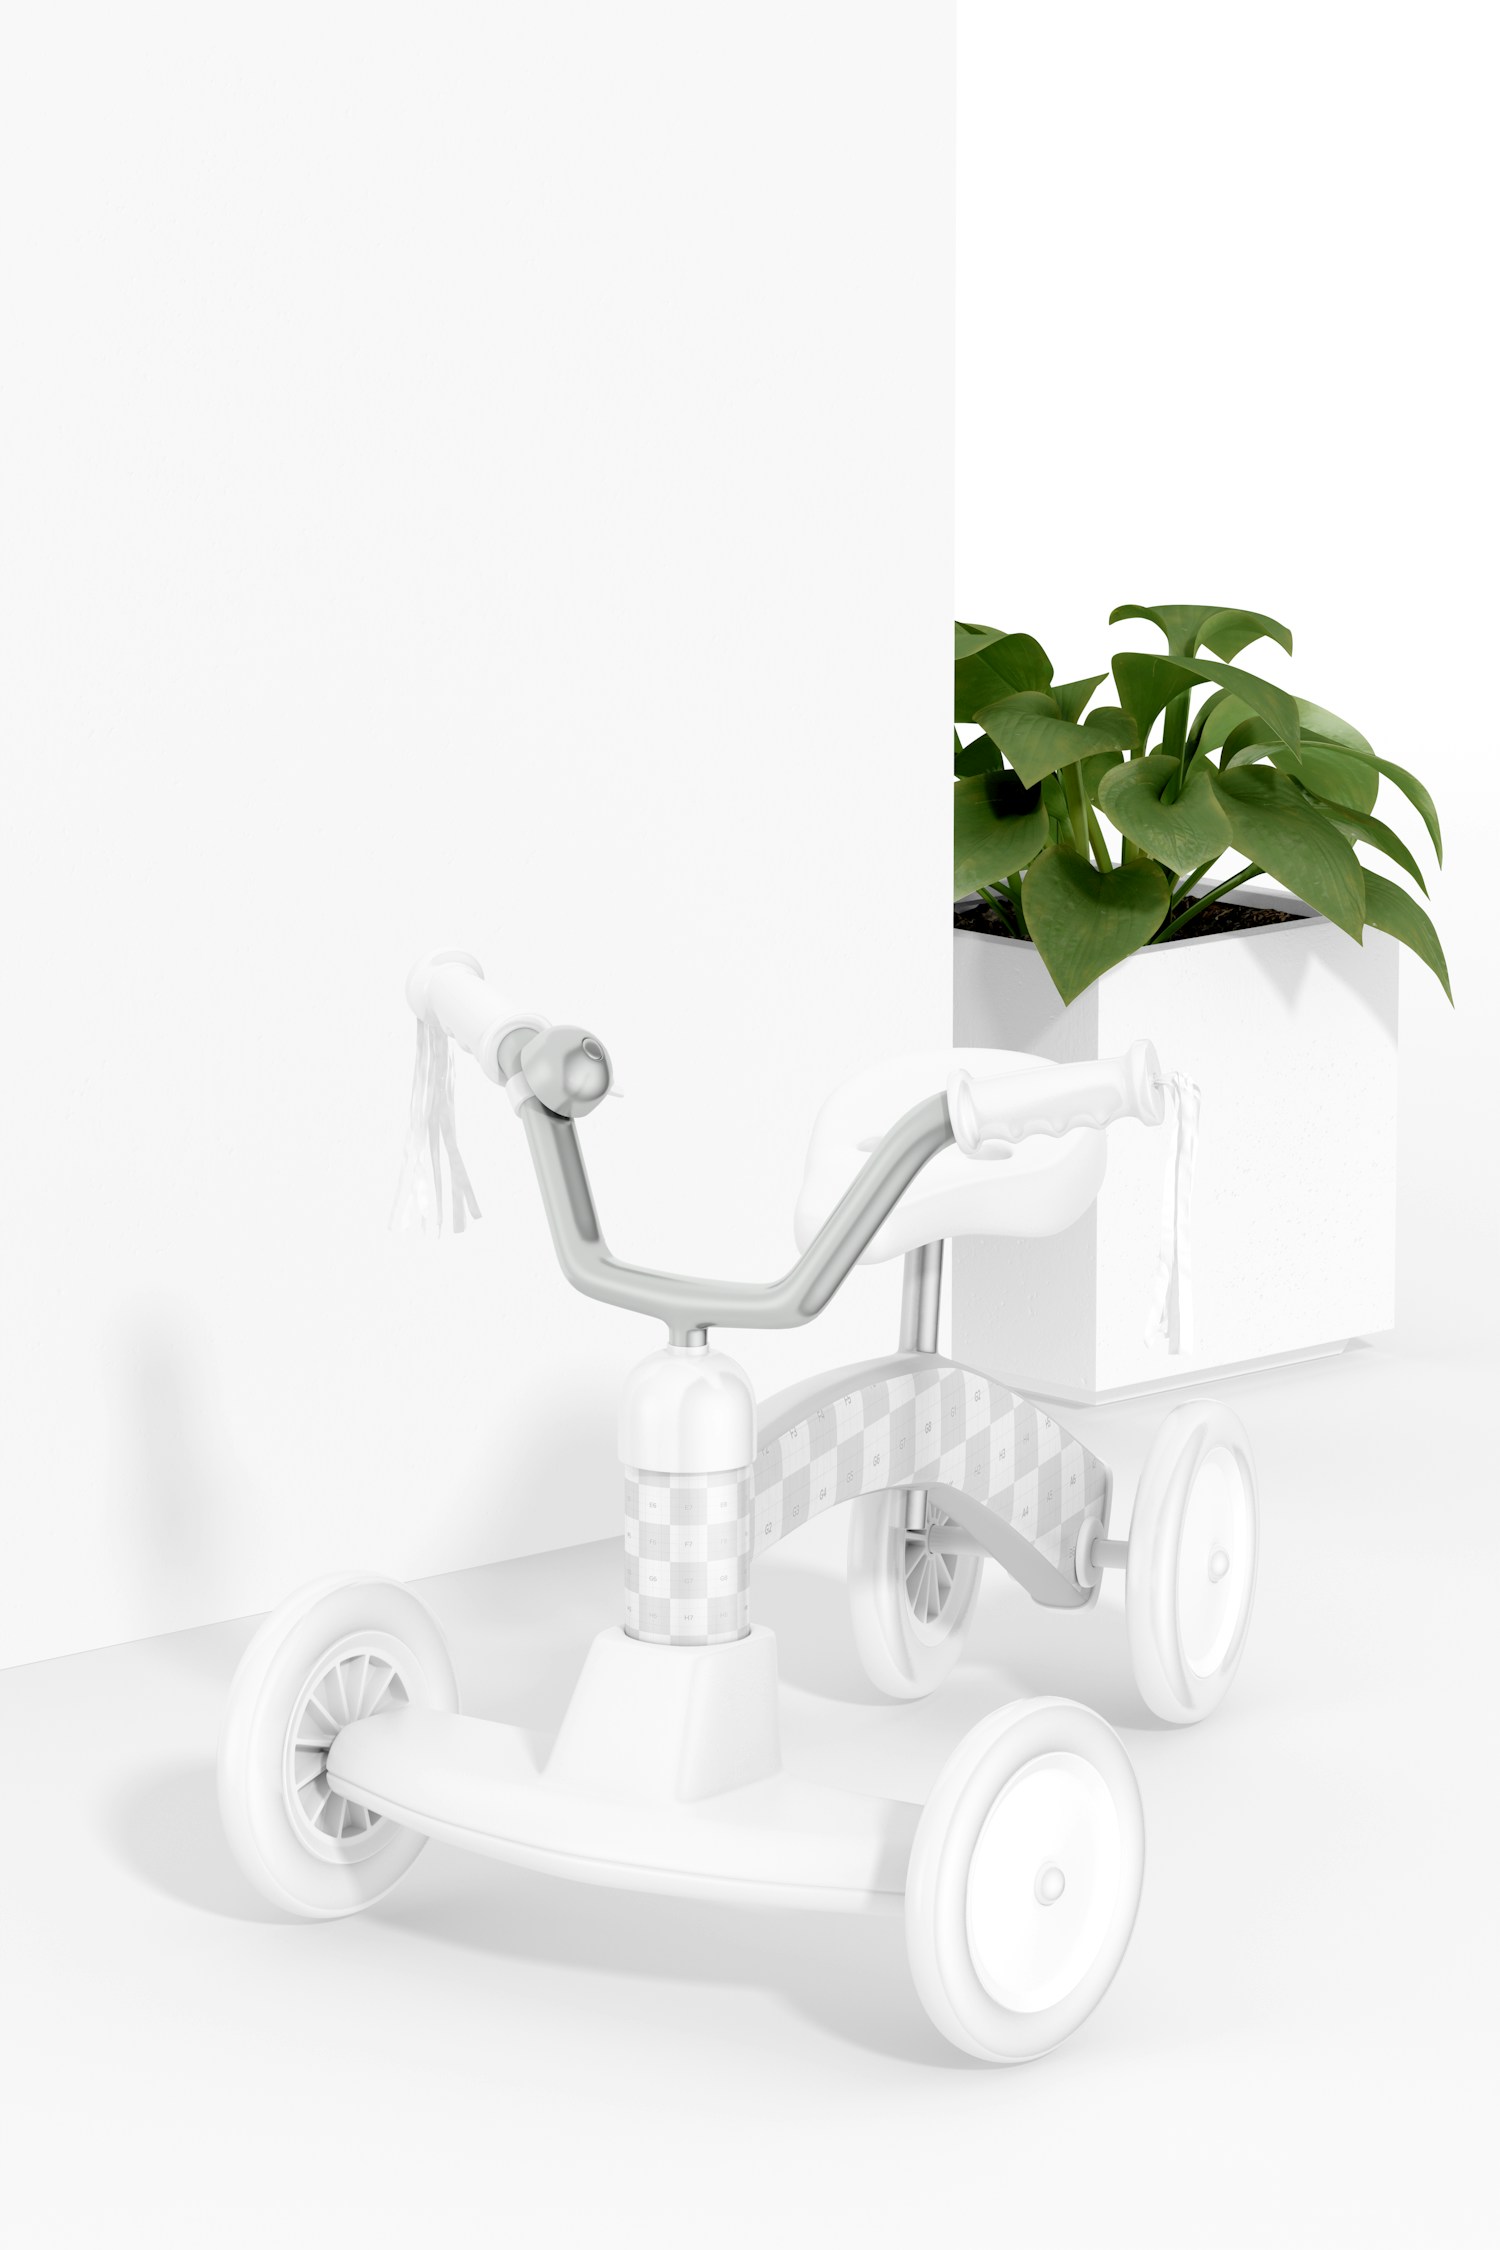 Retro Tricycle Mockup, with Plant Pot